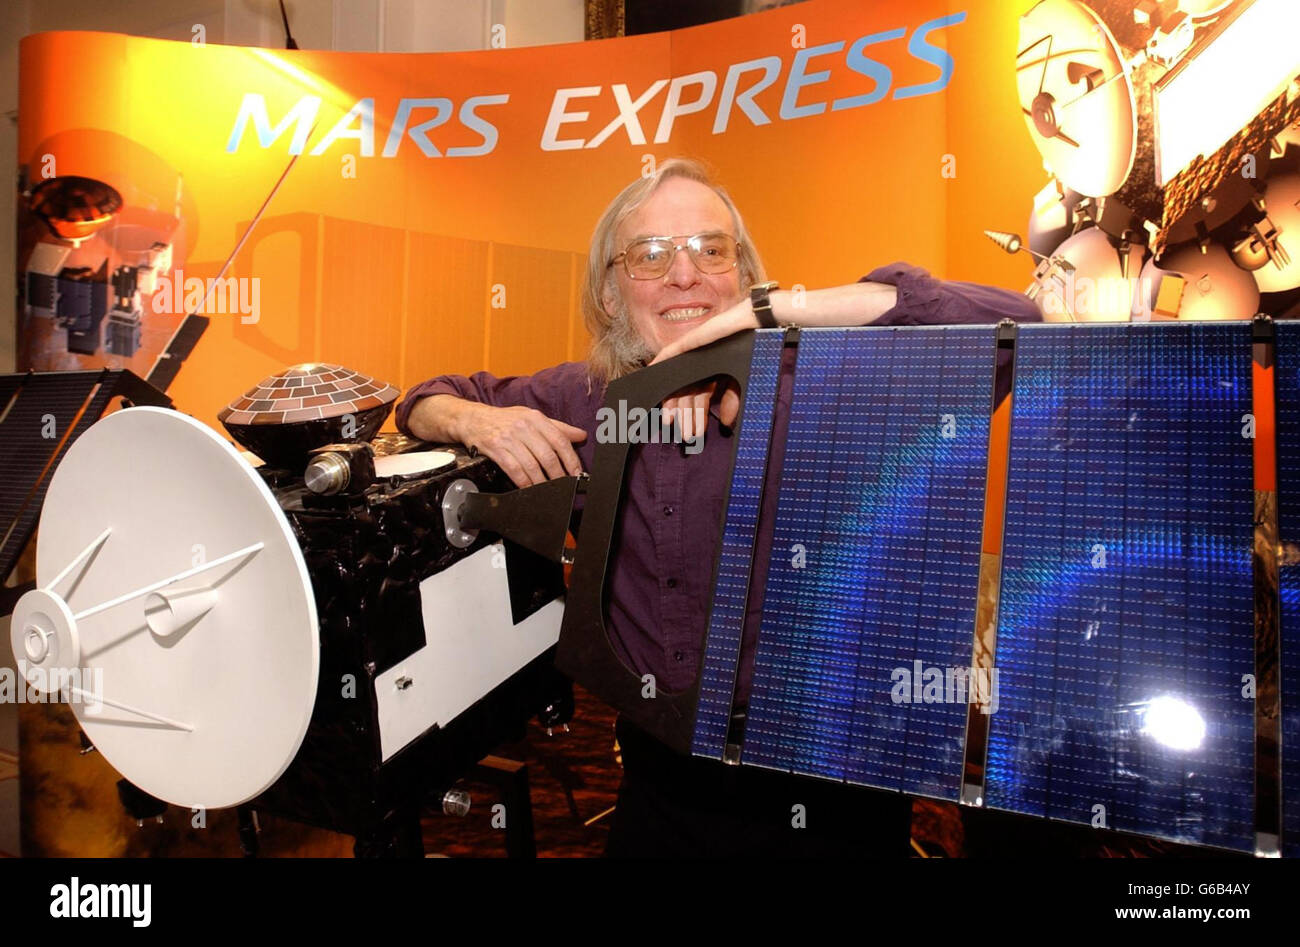 Professor Colin Pillinger with a model of the orbiter Mars Express, at the Royal Society, London. * The orbiter, which is scheduled to blast off from a launch pad in Kazakhstan on June 2 2003, will carry his lander 'Beagle 2' that will reach Mars by christmas in the hope of finally discovering whether life has ever existed on the Red Planet. Stock Photo